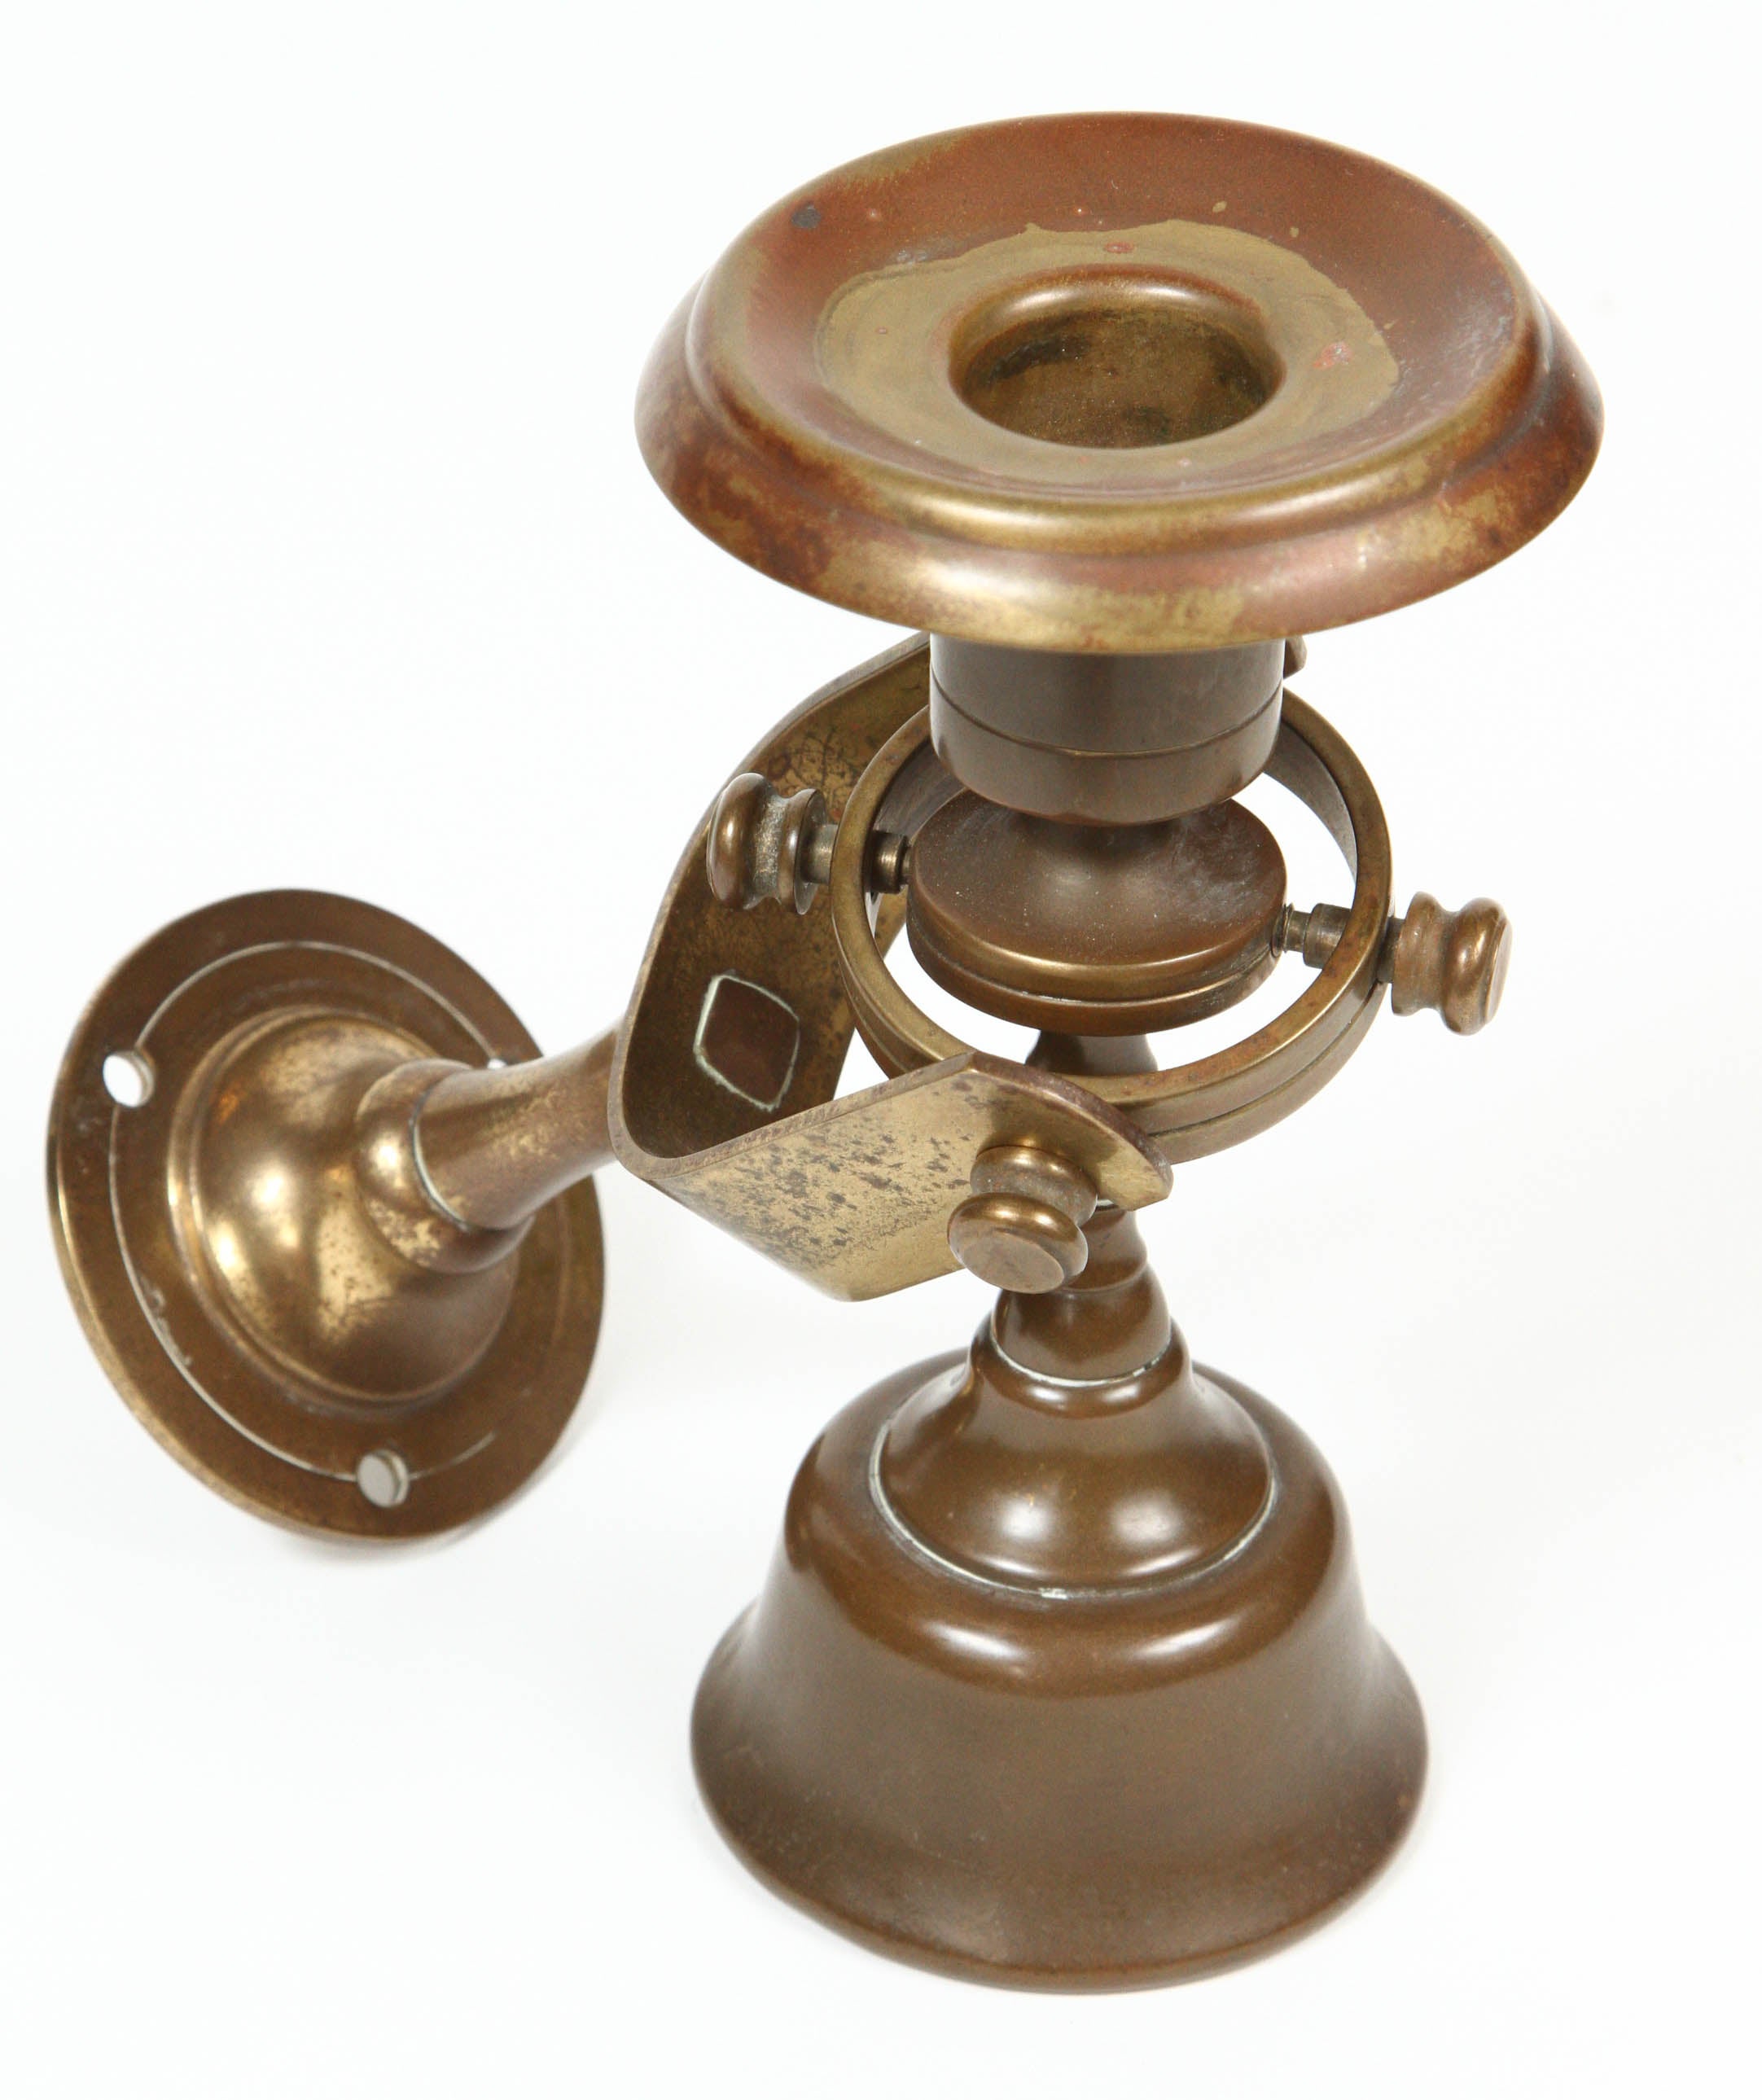 1920s weighted ship candleholders with gimbal to be attached to a wall.
Candlestick sits in gimbal and is meant to sway with ship movement.
Made in USA.
Bottom stamped 